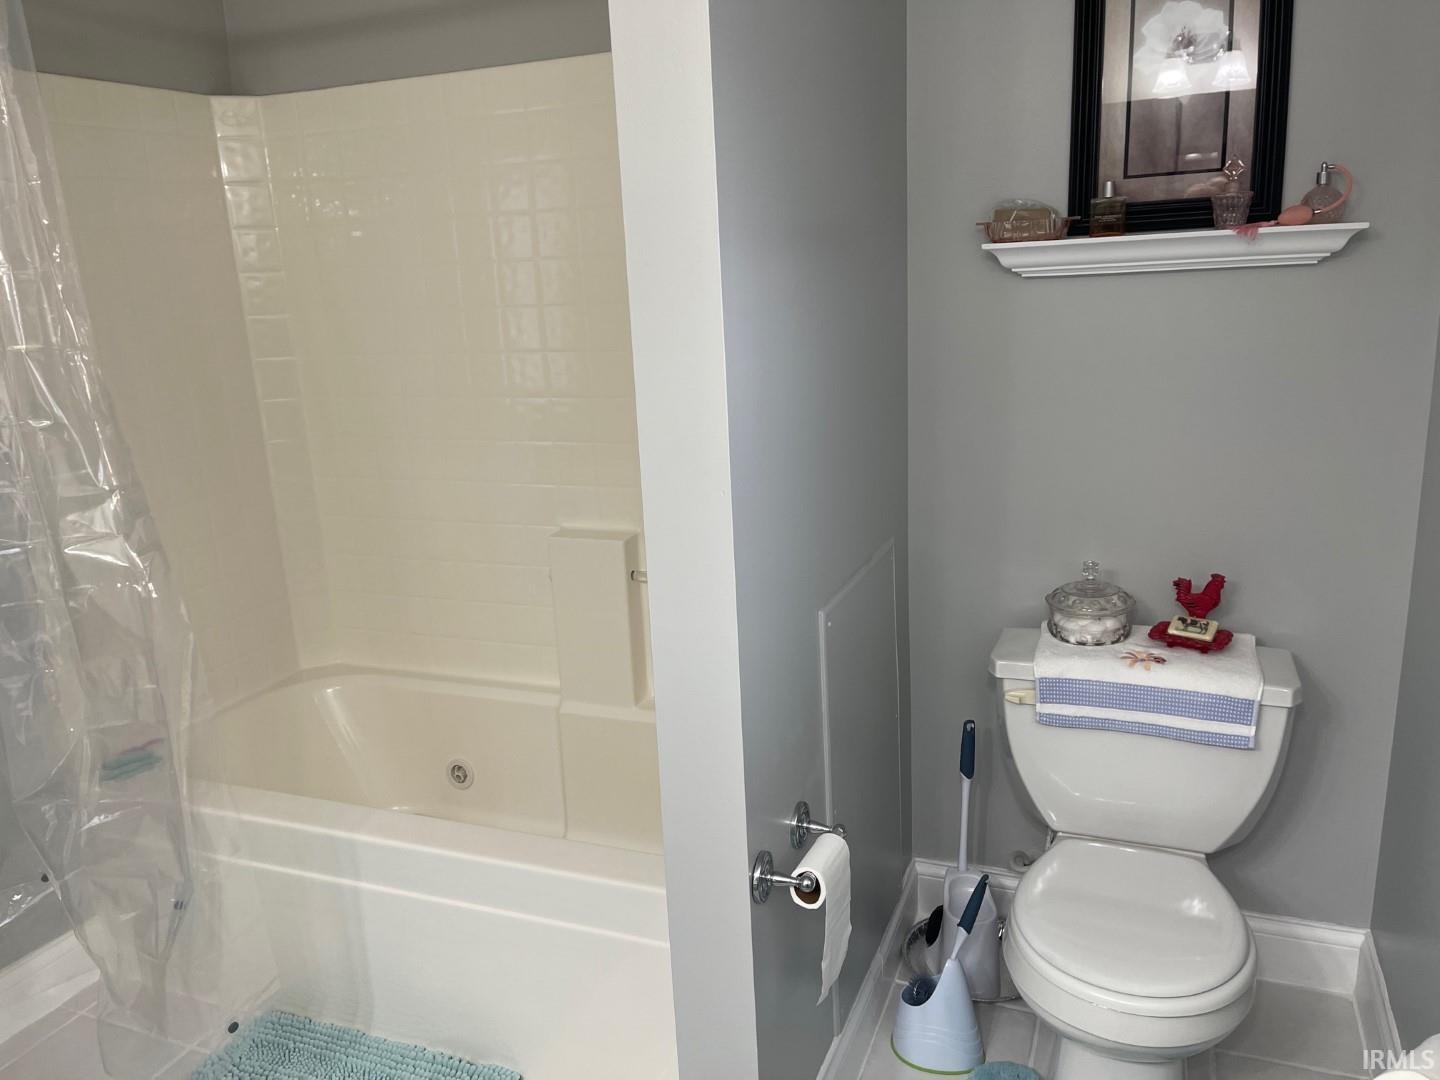 Jetted tub/shower in master bath